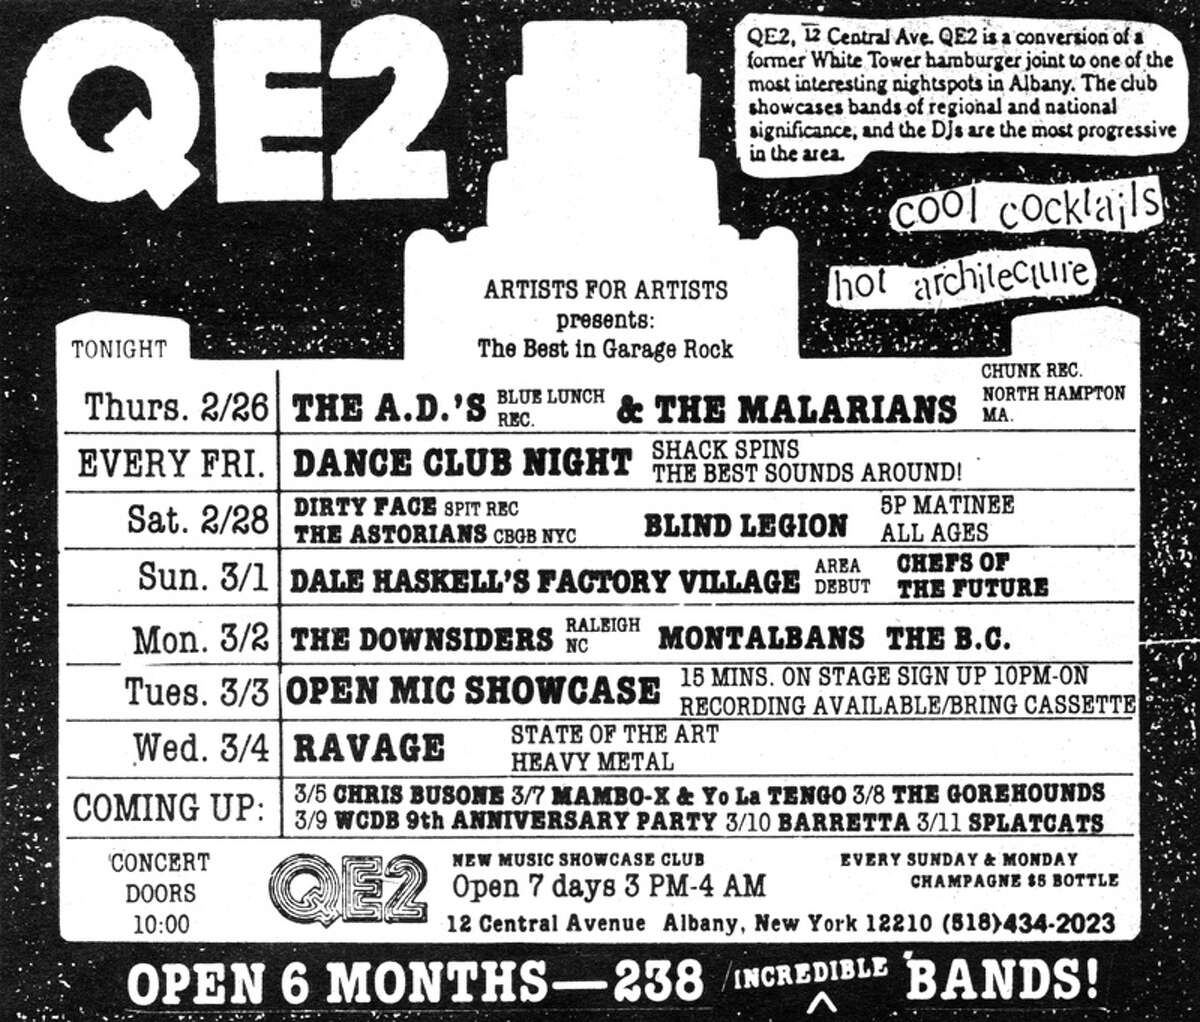 A week at QE2 in 1987 A much belated thank you, Charlene Shortsleeve for promoting live local music.